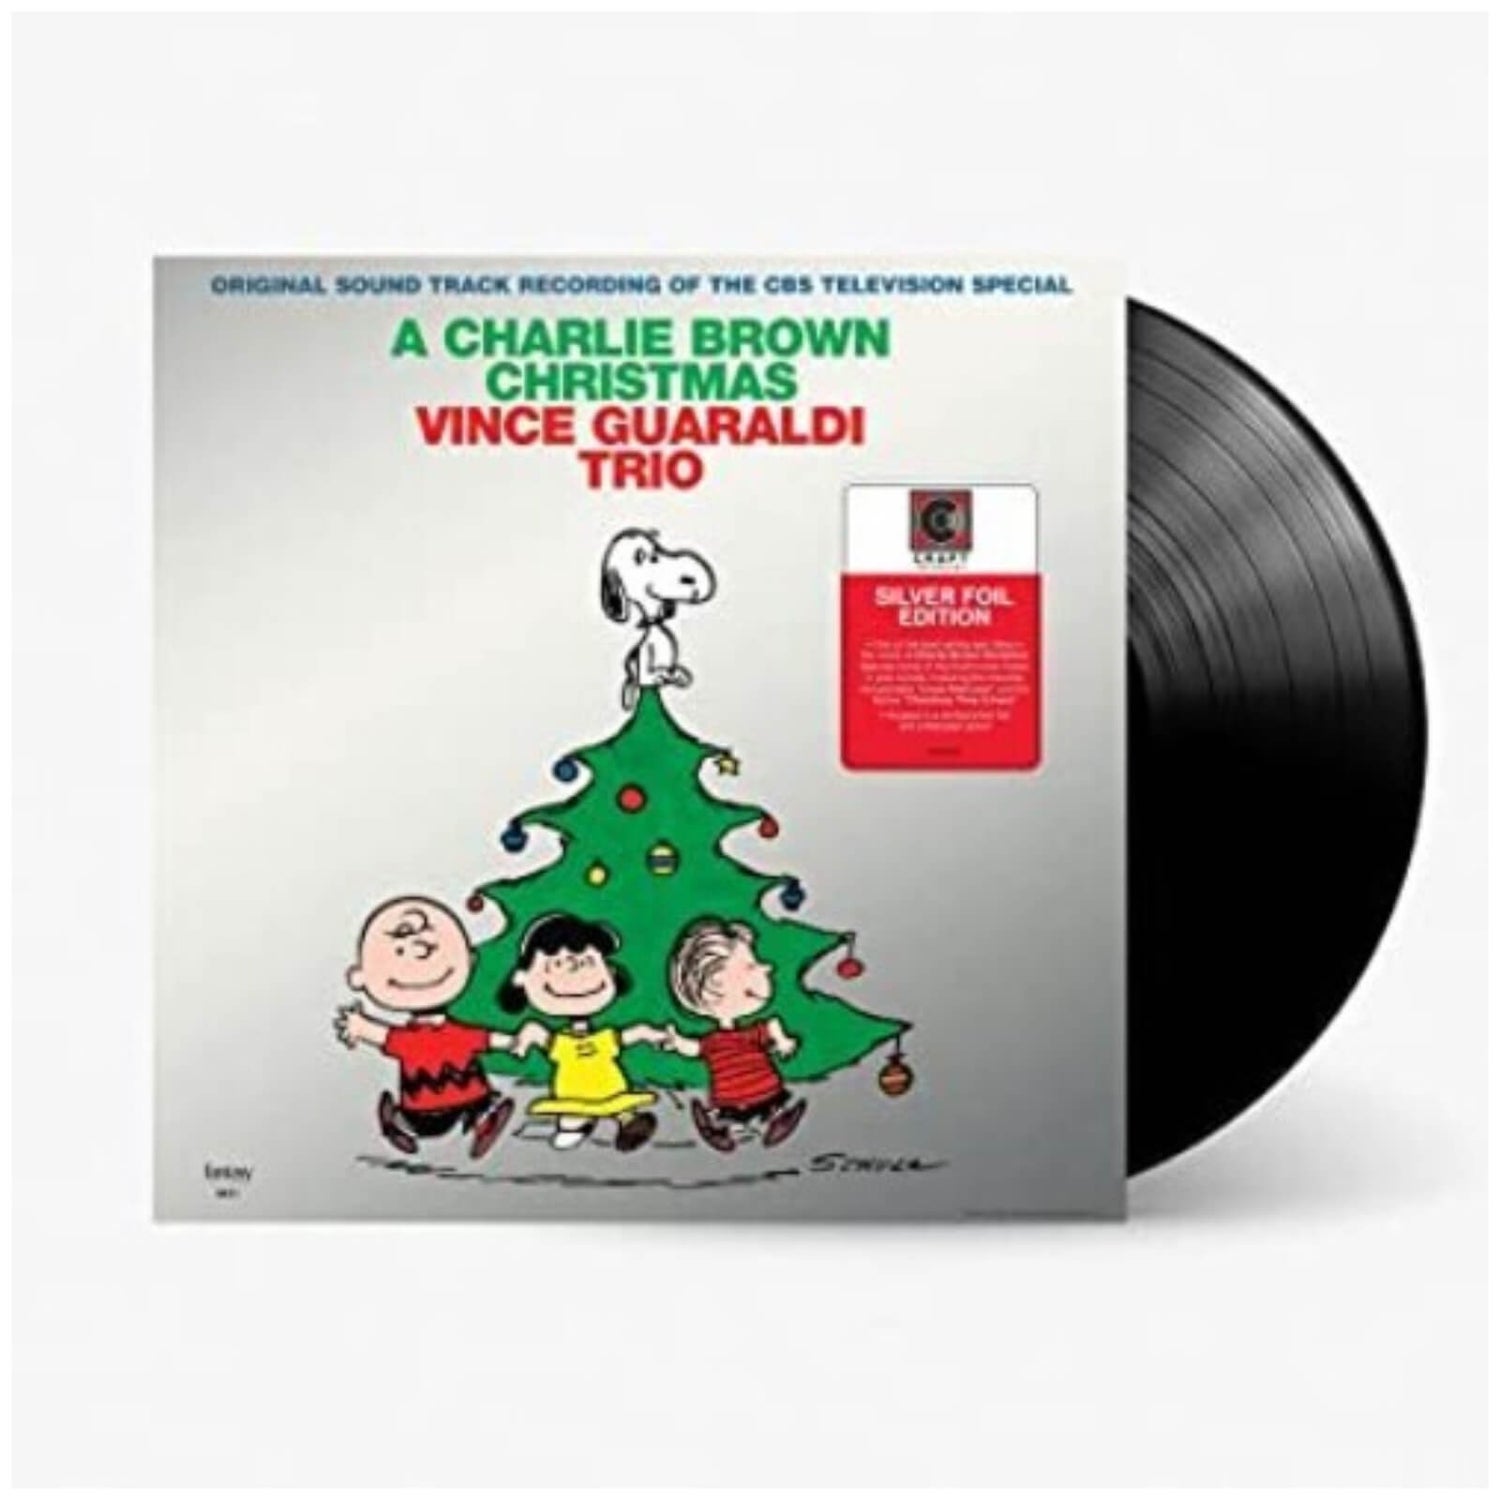 A Charlie Brown Christmas (Original Sound Track Recordings Of The CBS Television Special) Vinyl (2021 Edition)